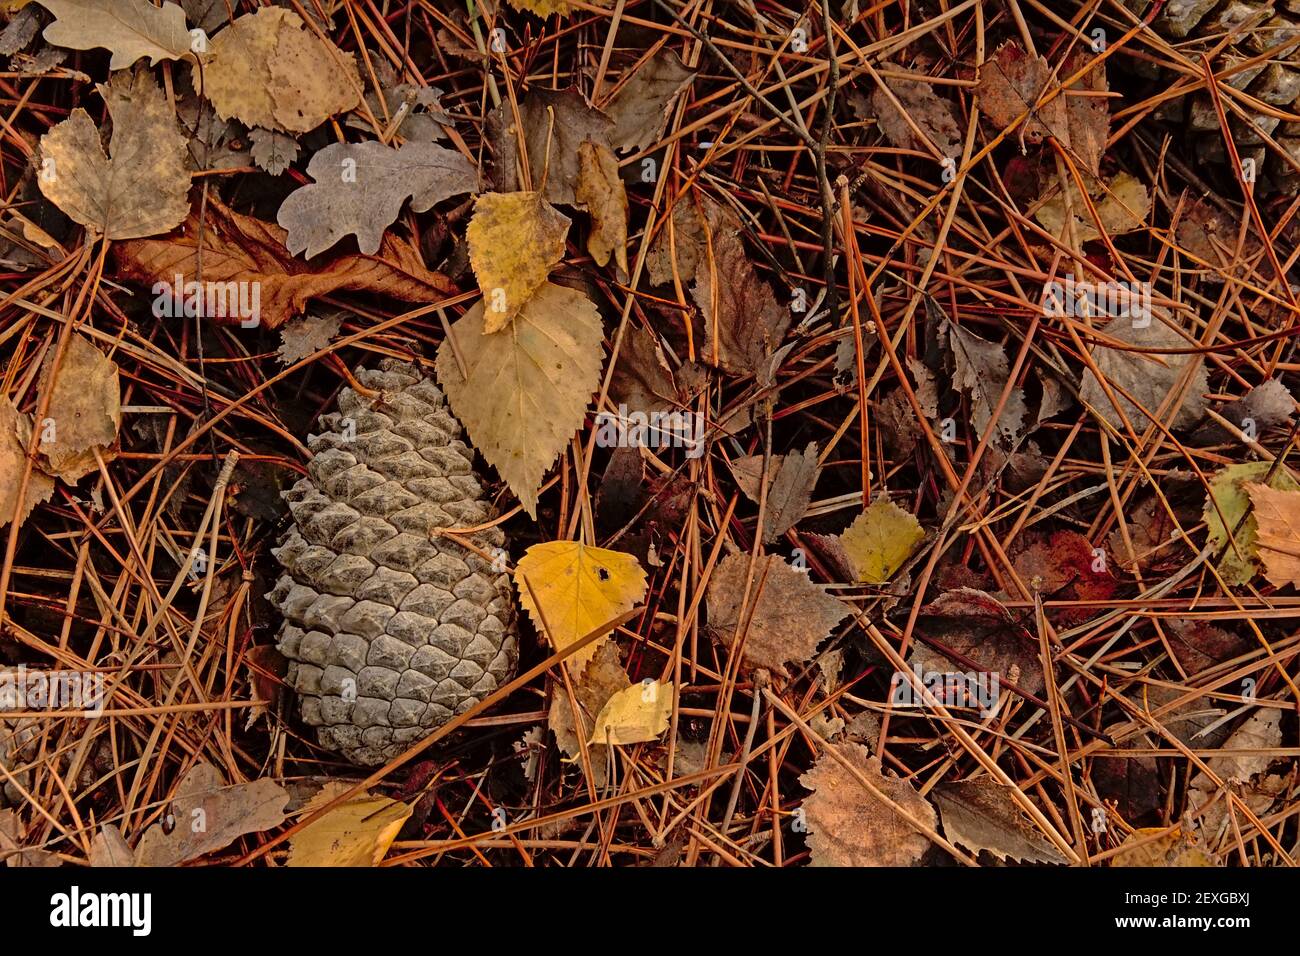 Spruce cone on the forest floor, in between needles and autumn leafs Stock Photo